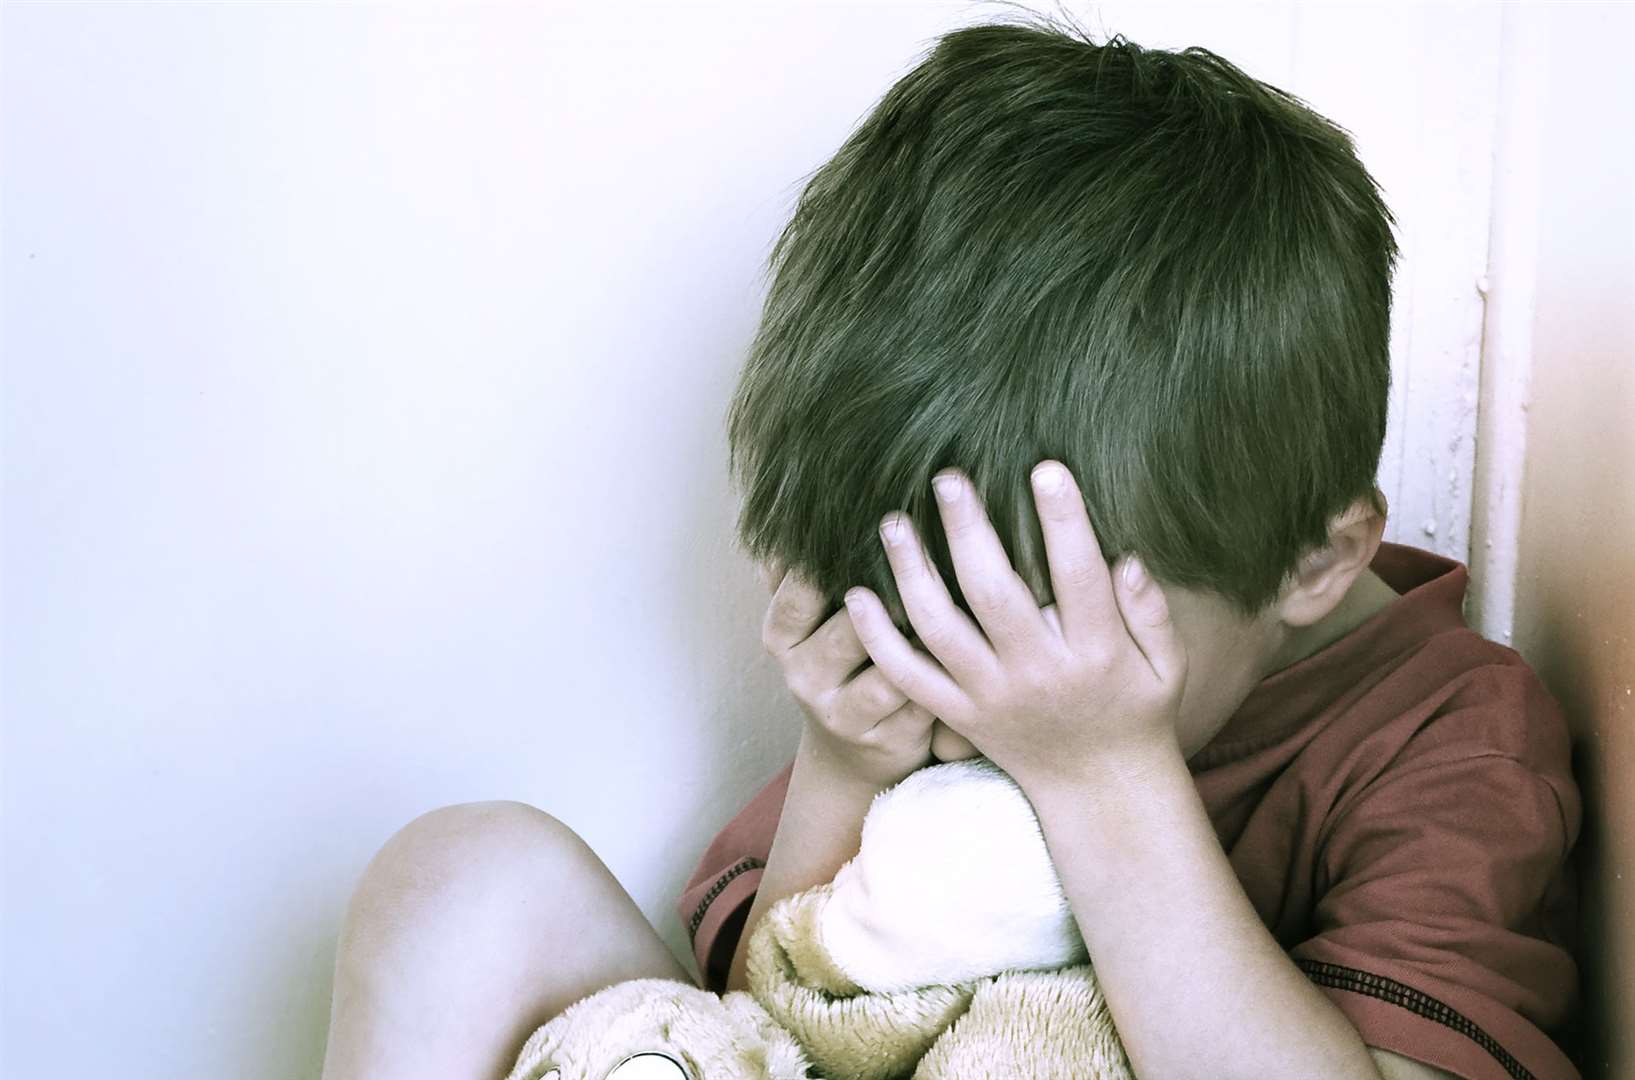 The child wrote about the bullying in a prayer. Photo: Thinkstock